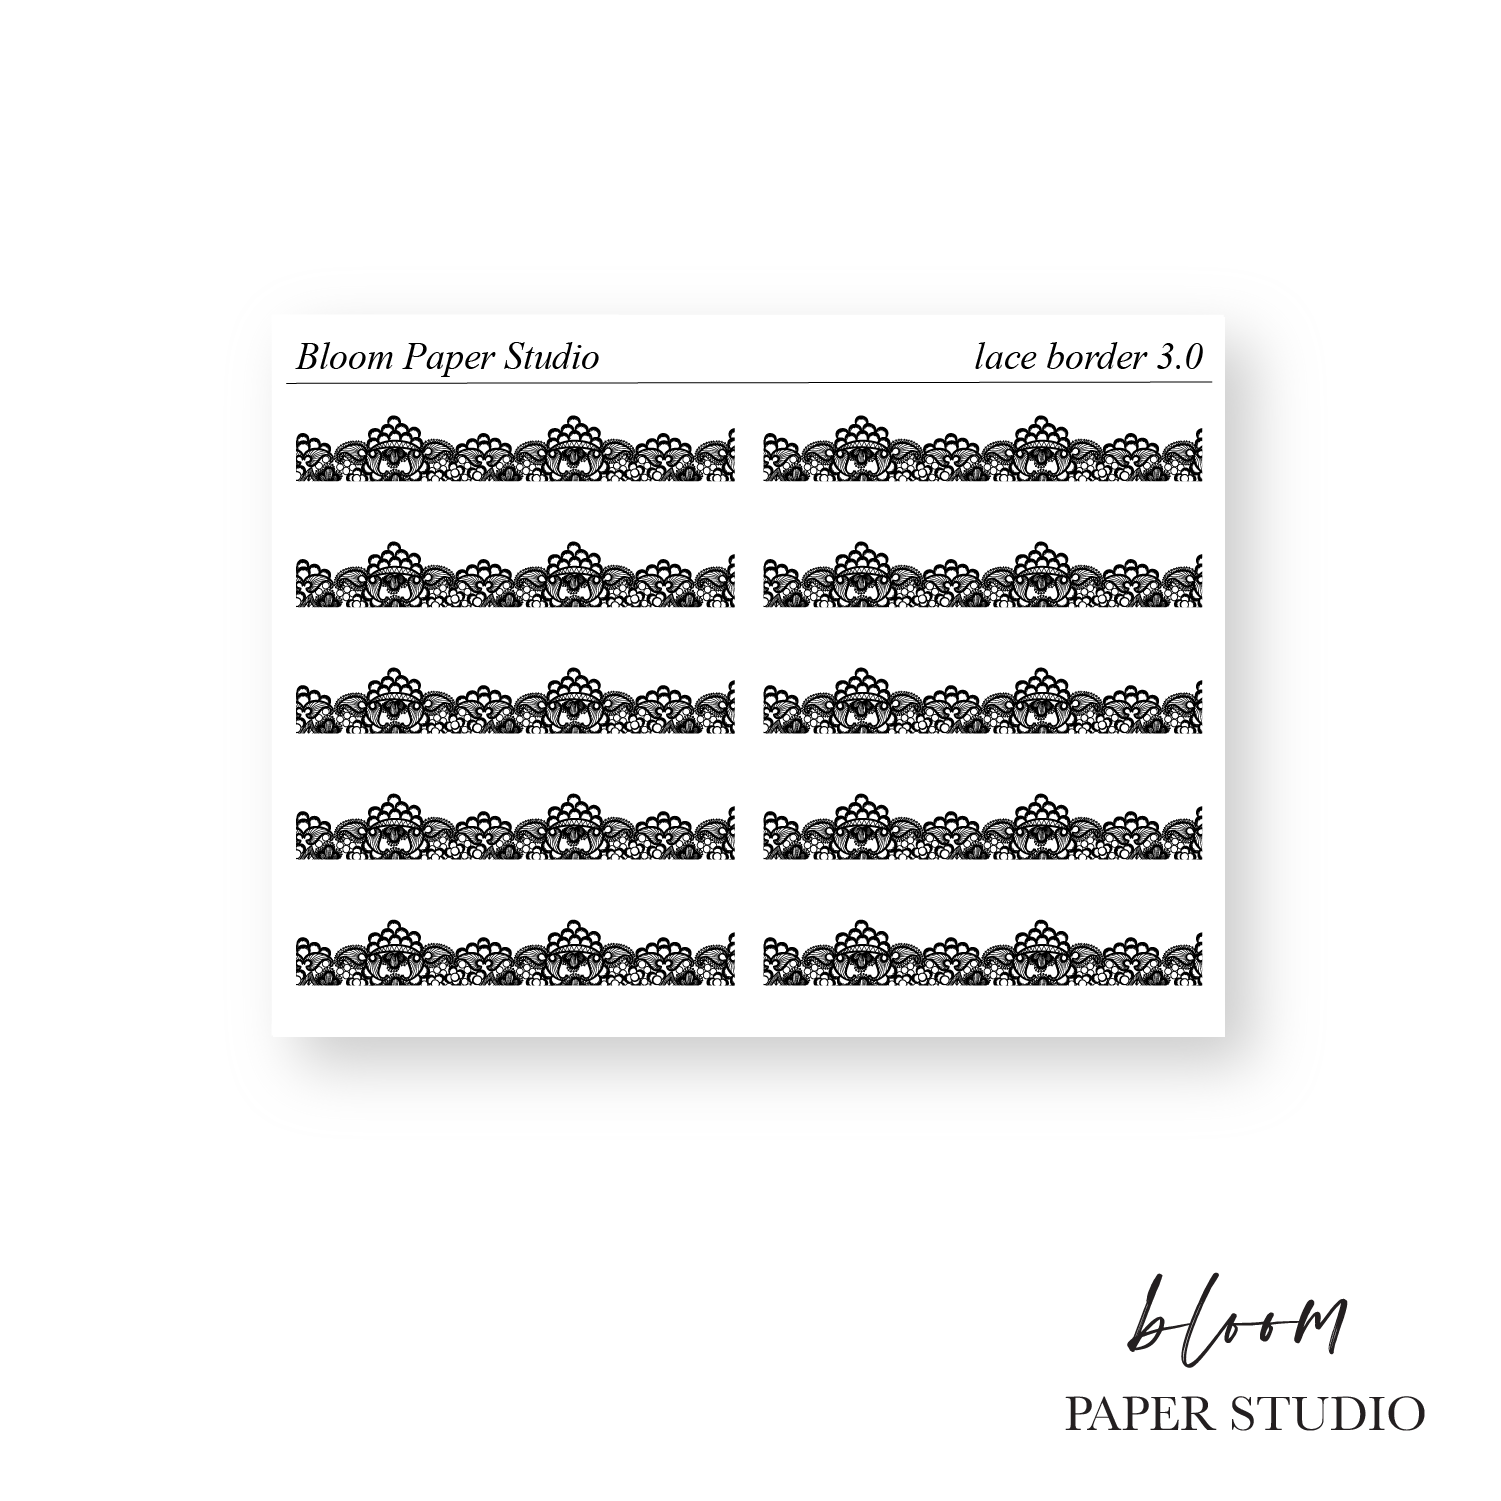 Foiled Lace Border Stickers 3.0